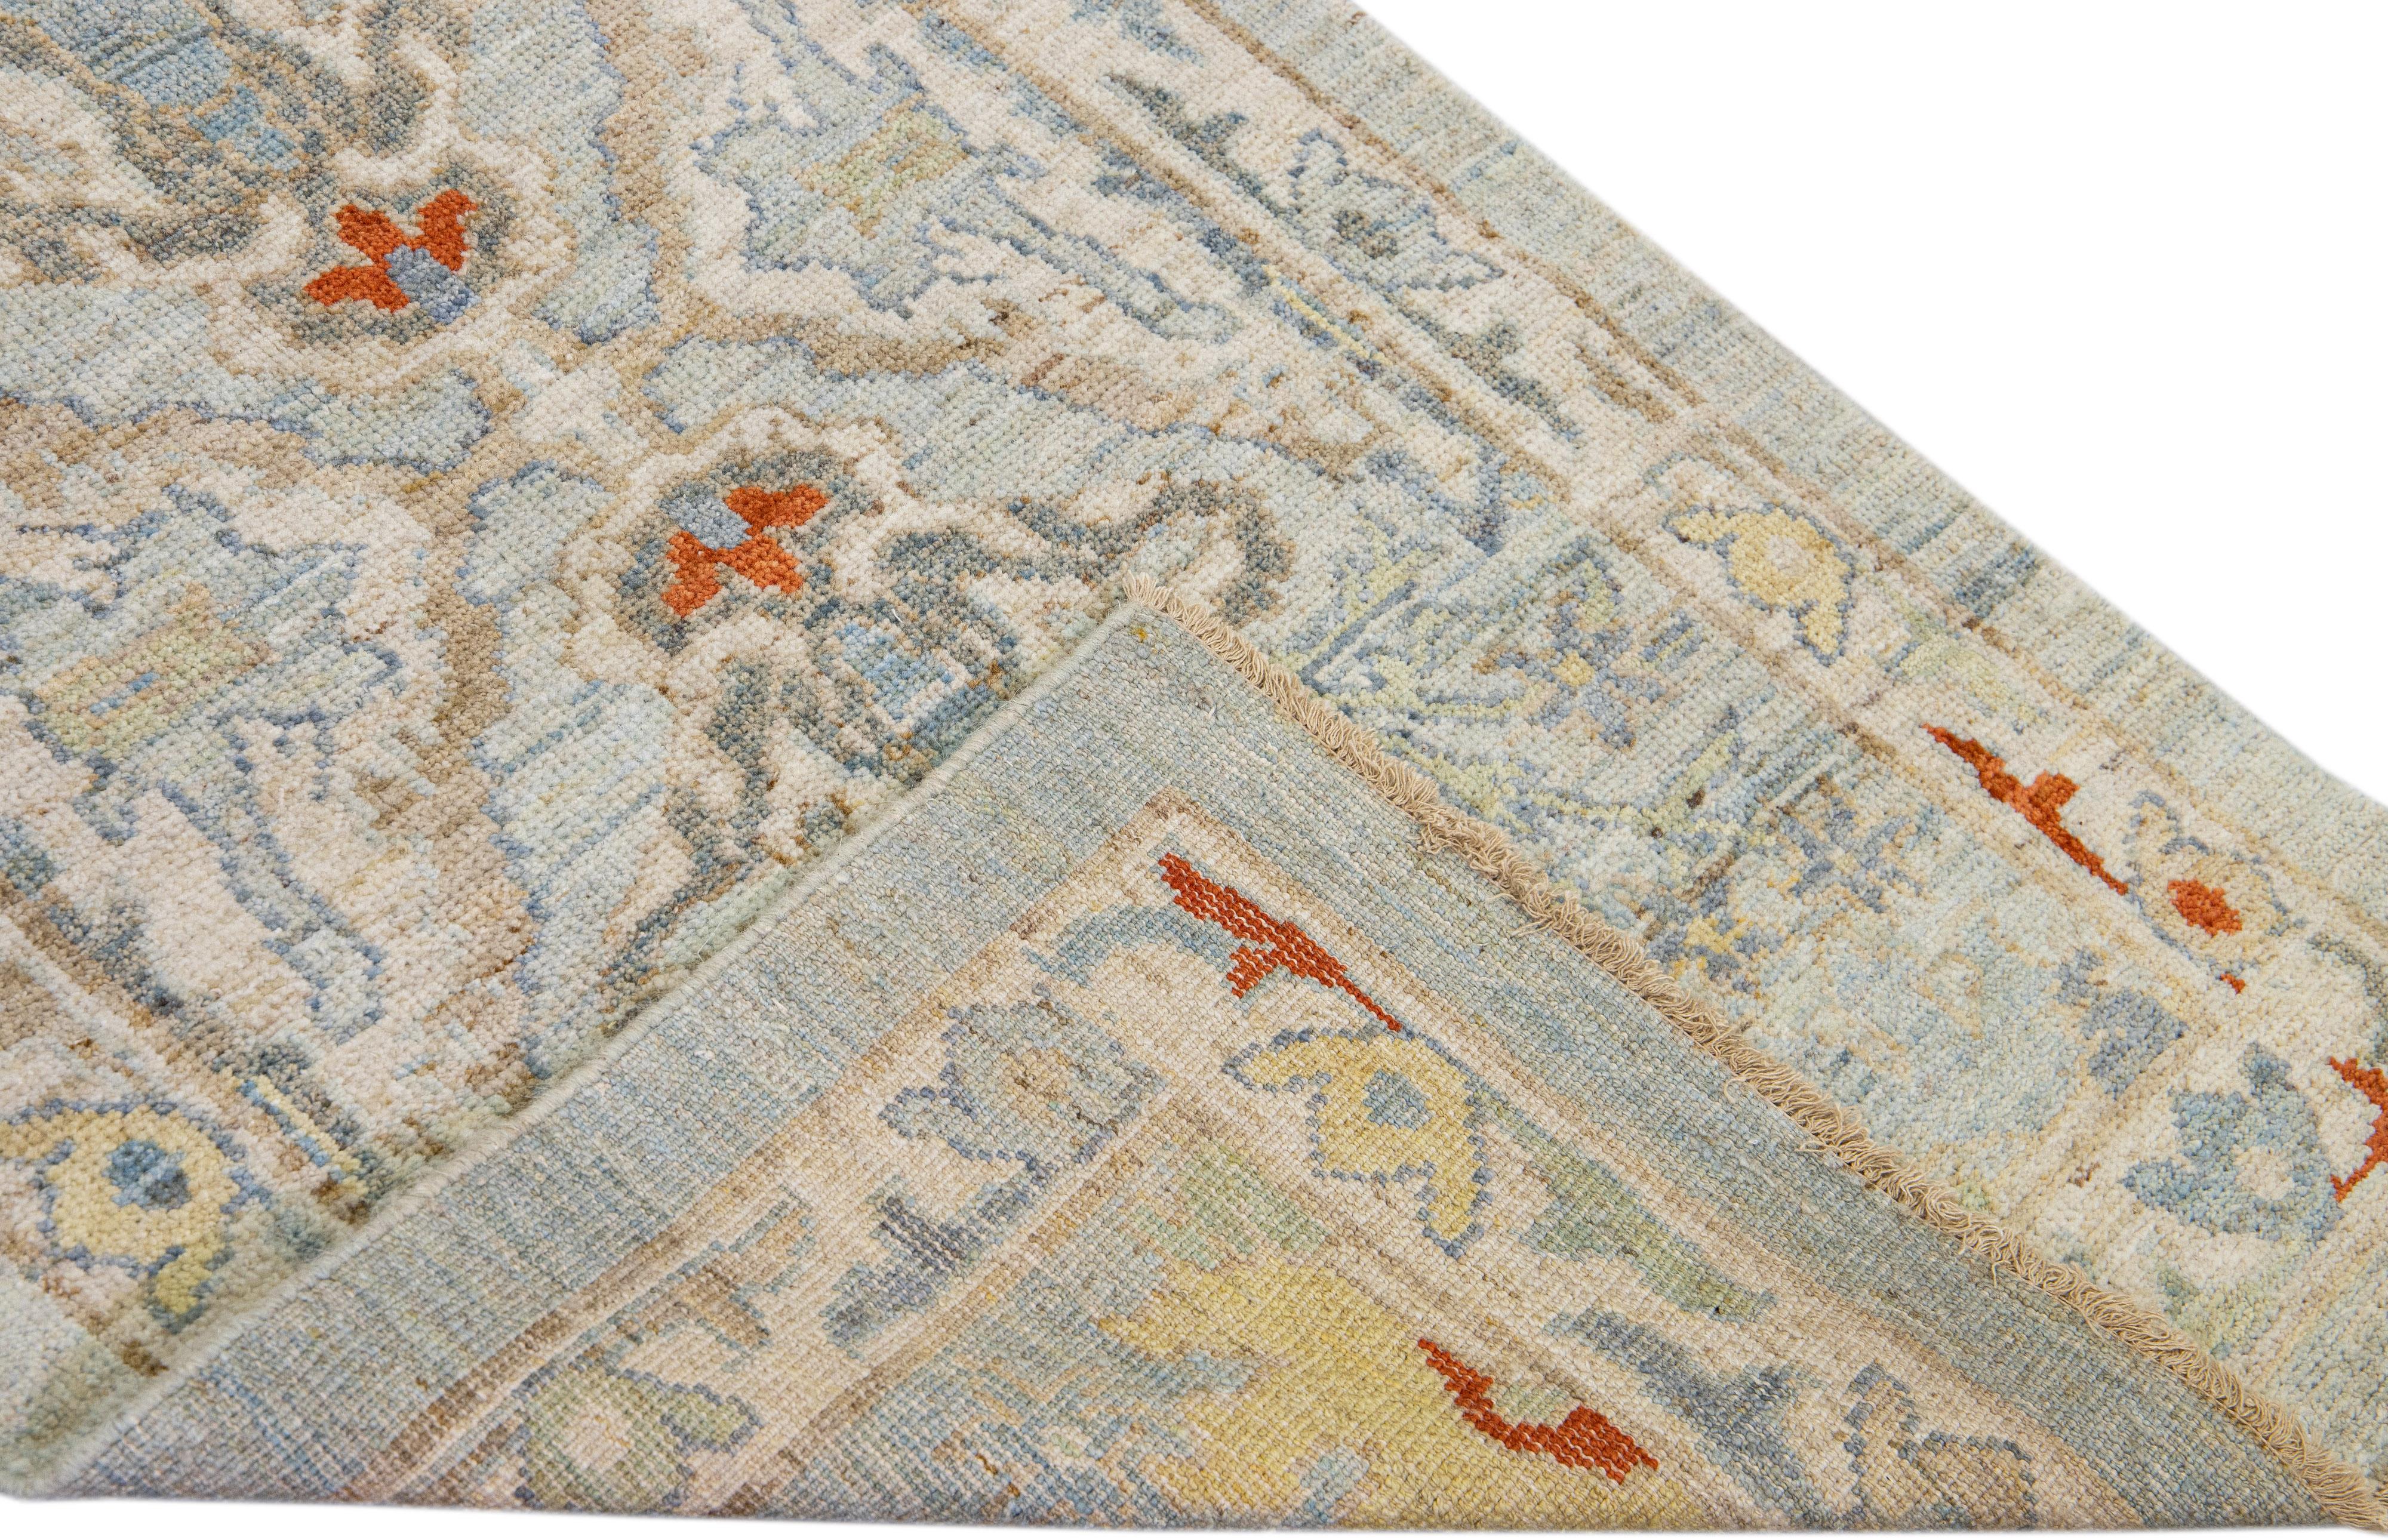 Beautiful modern Mahal hand-knotted wool runner with a light blue field. This Piece has multicolor accents in a gorgeous all-over Classic floral design.

This rug measures: 2'10'' x 20'. 

Our rugs are professional cleaning before shipping.

